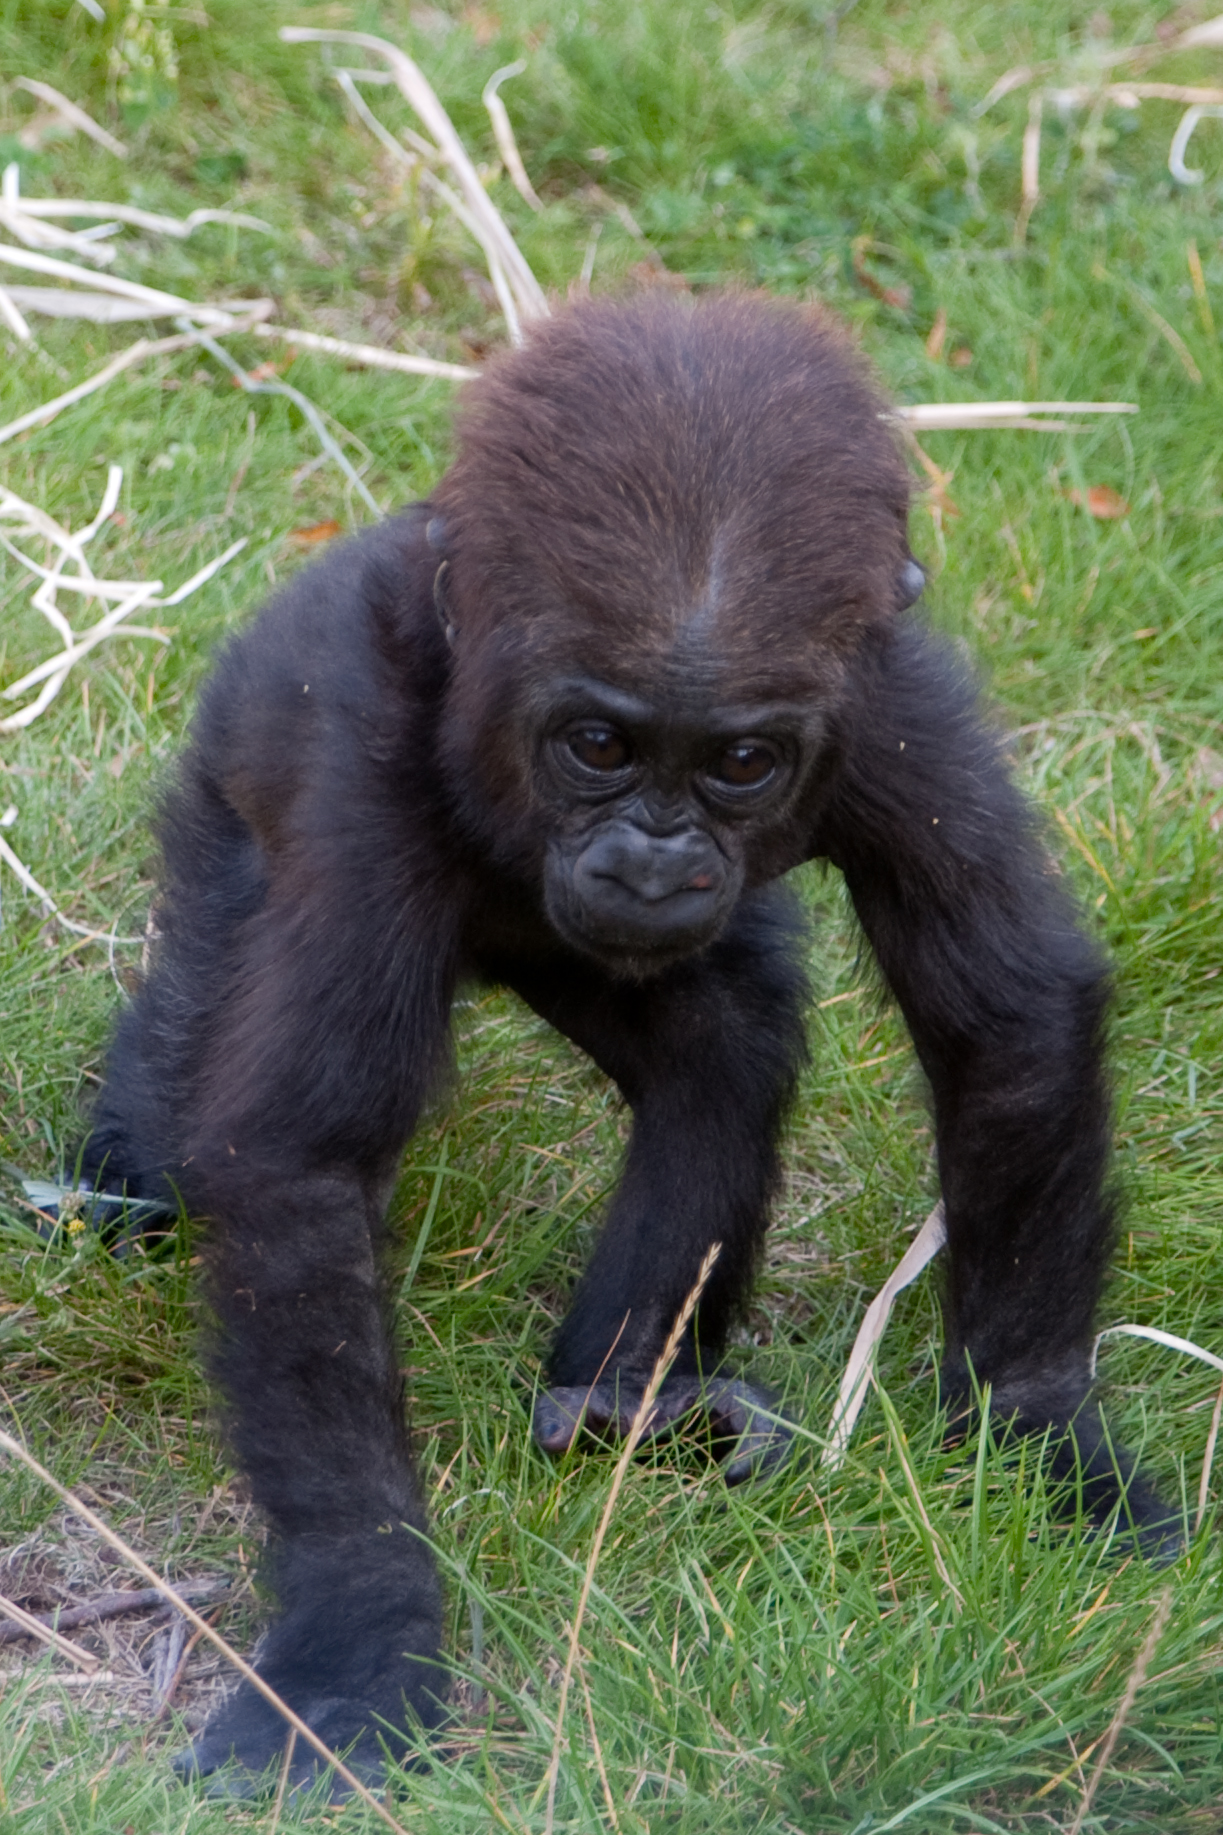 Read and Do: Meet Angela the Baby Gorilla, Who is Also “Sheltering in Place”